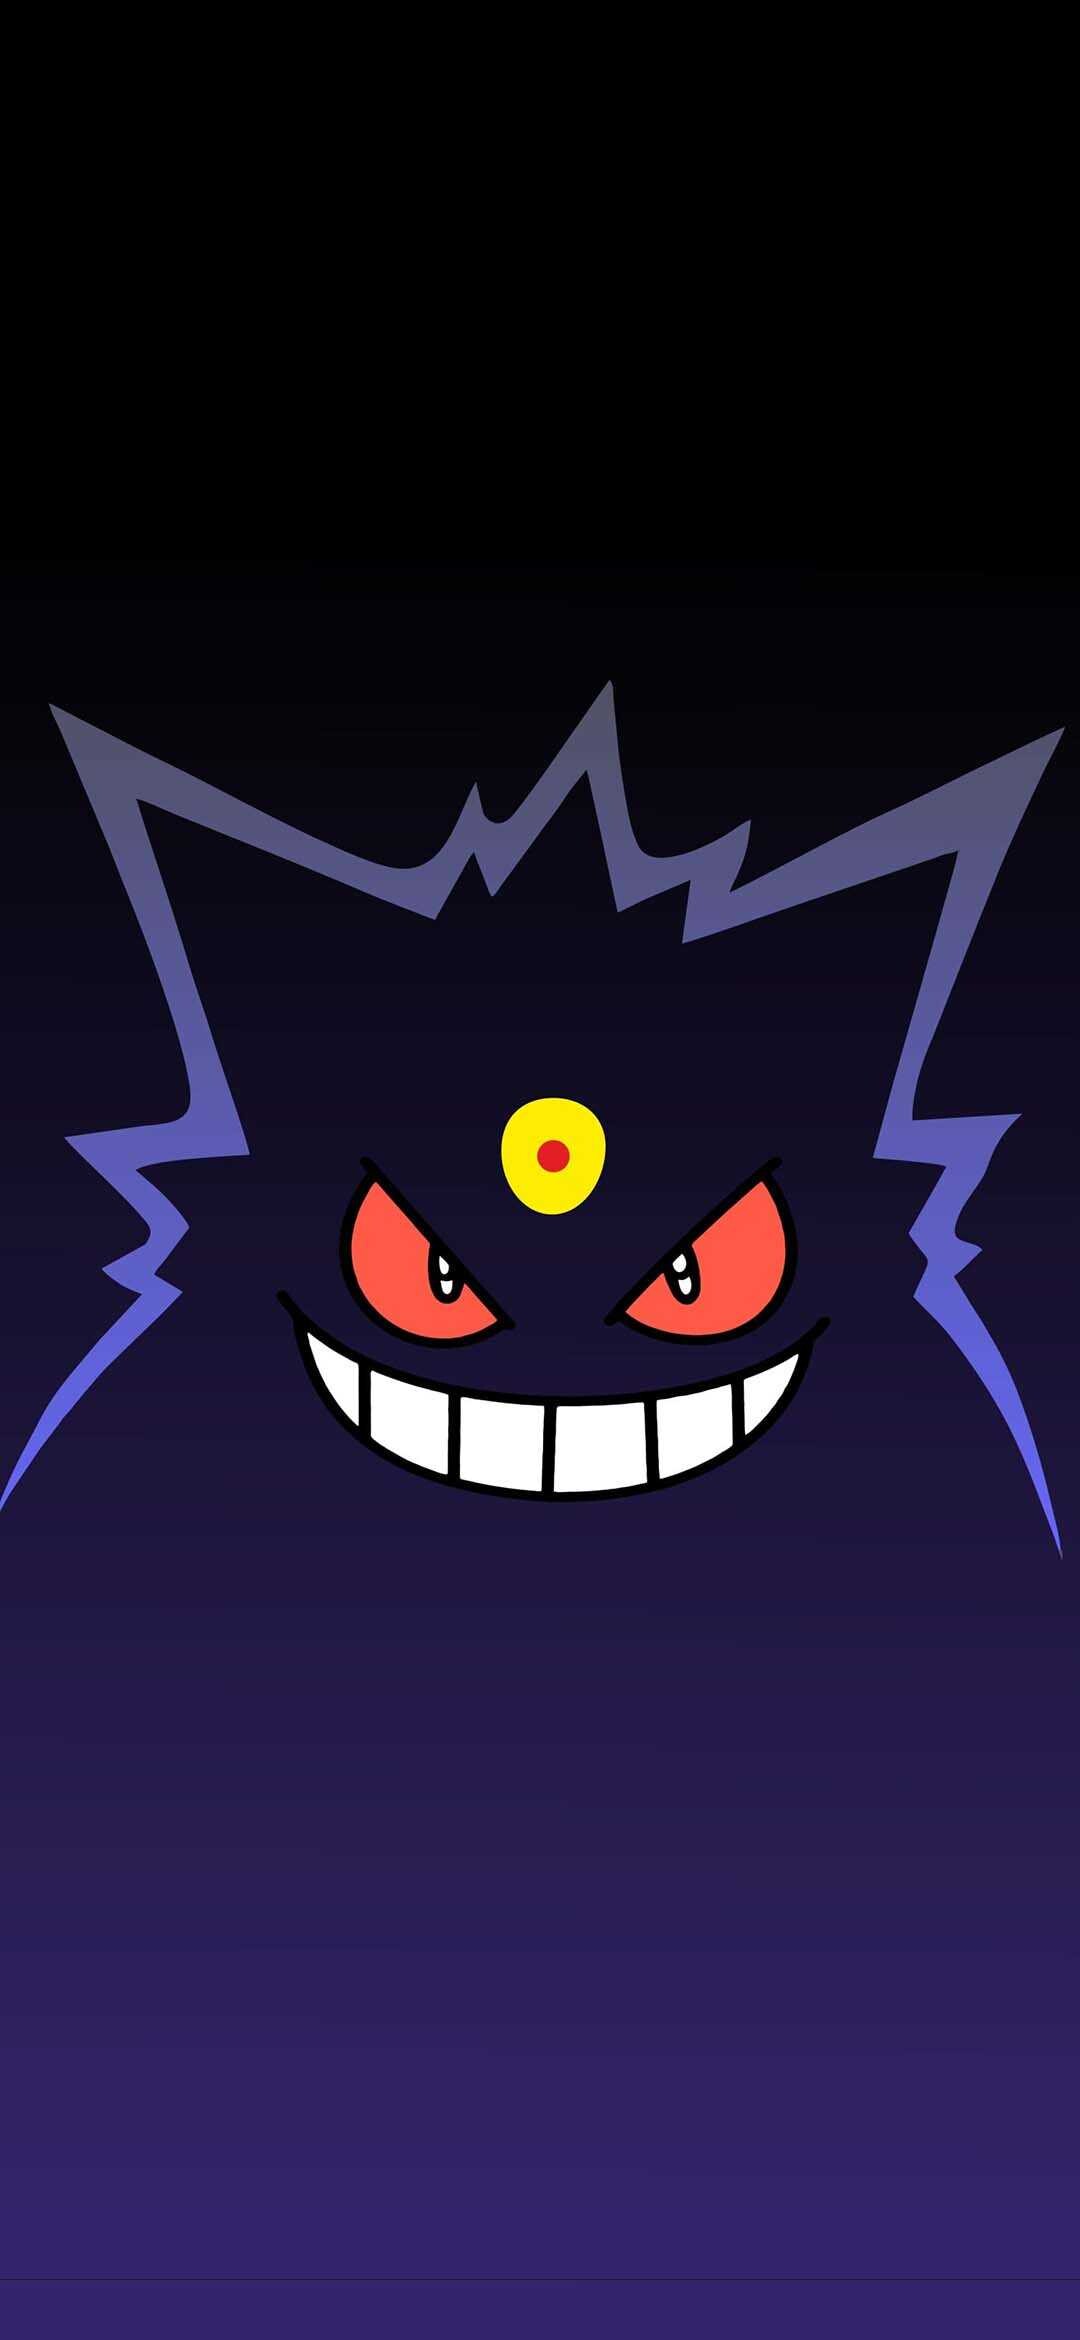 Gengar: The third eye on the forehead, The oval, yellow unblinking eye, Allowing to see into other dimensions. 1080x2340 HD Background.